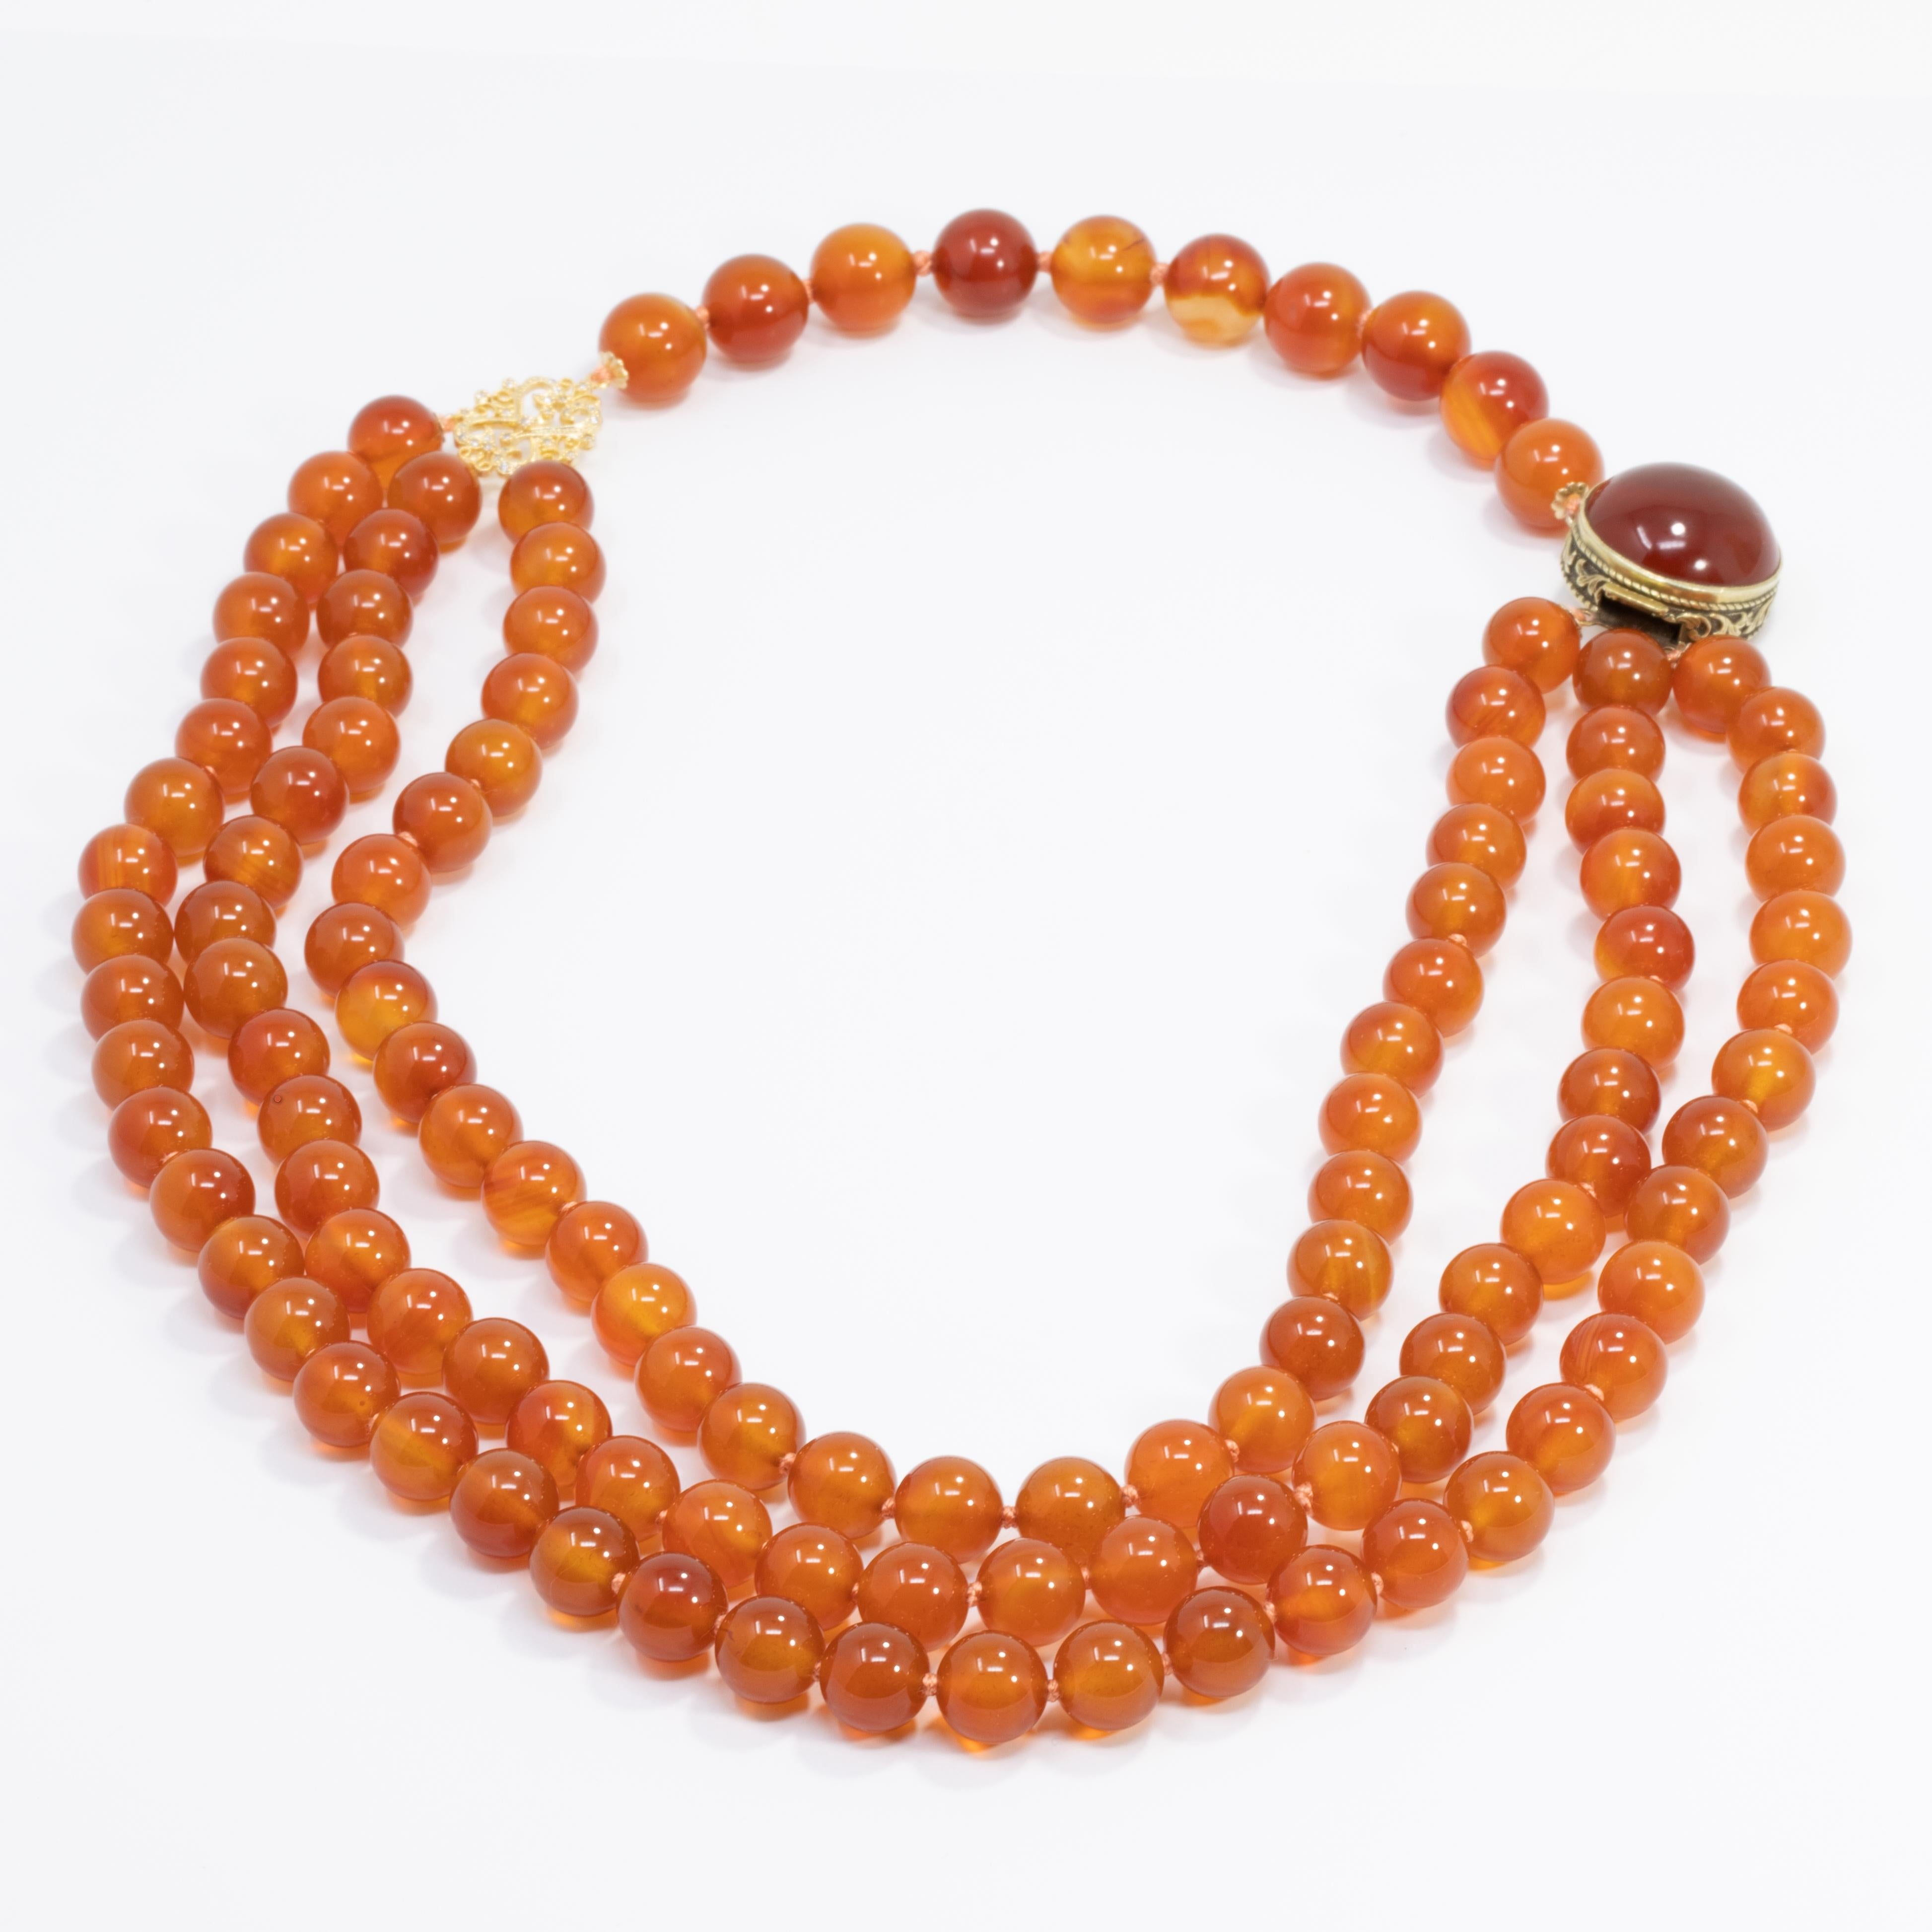 Carnelian Bead Knotted String Triple Strand Necklace, 14 Karat Clasp In Good Condition For Sale In Milford, DE